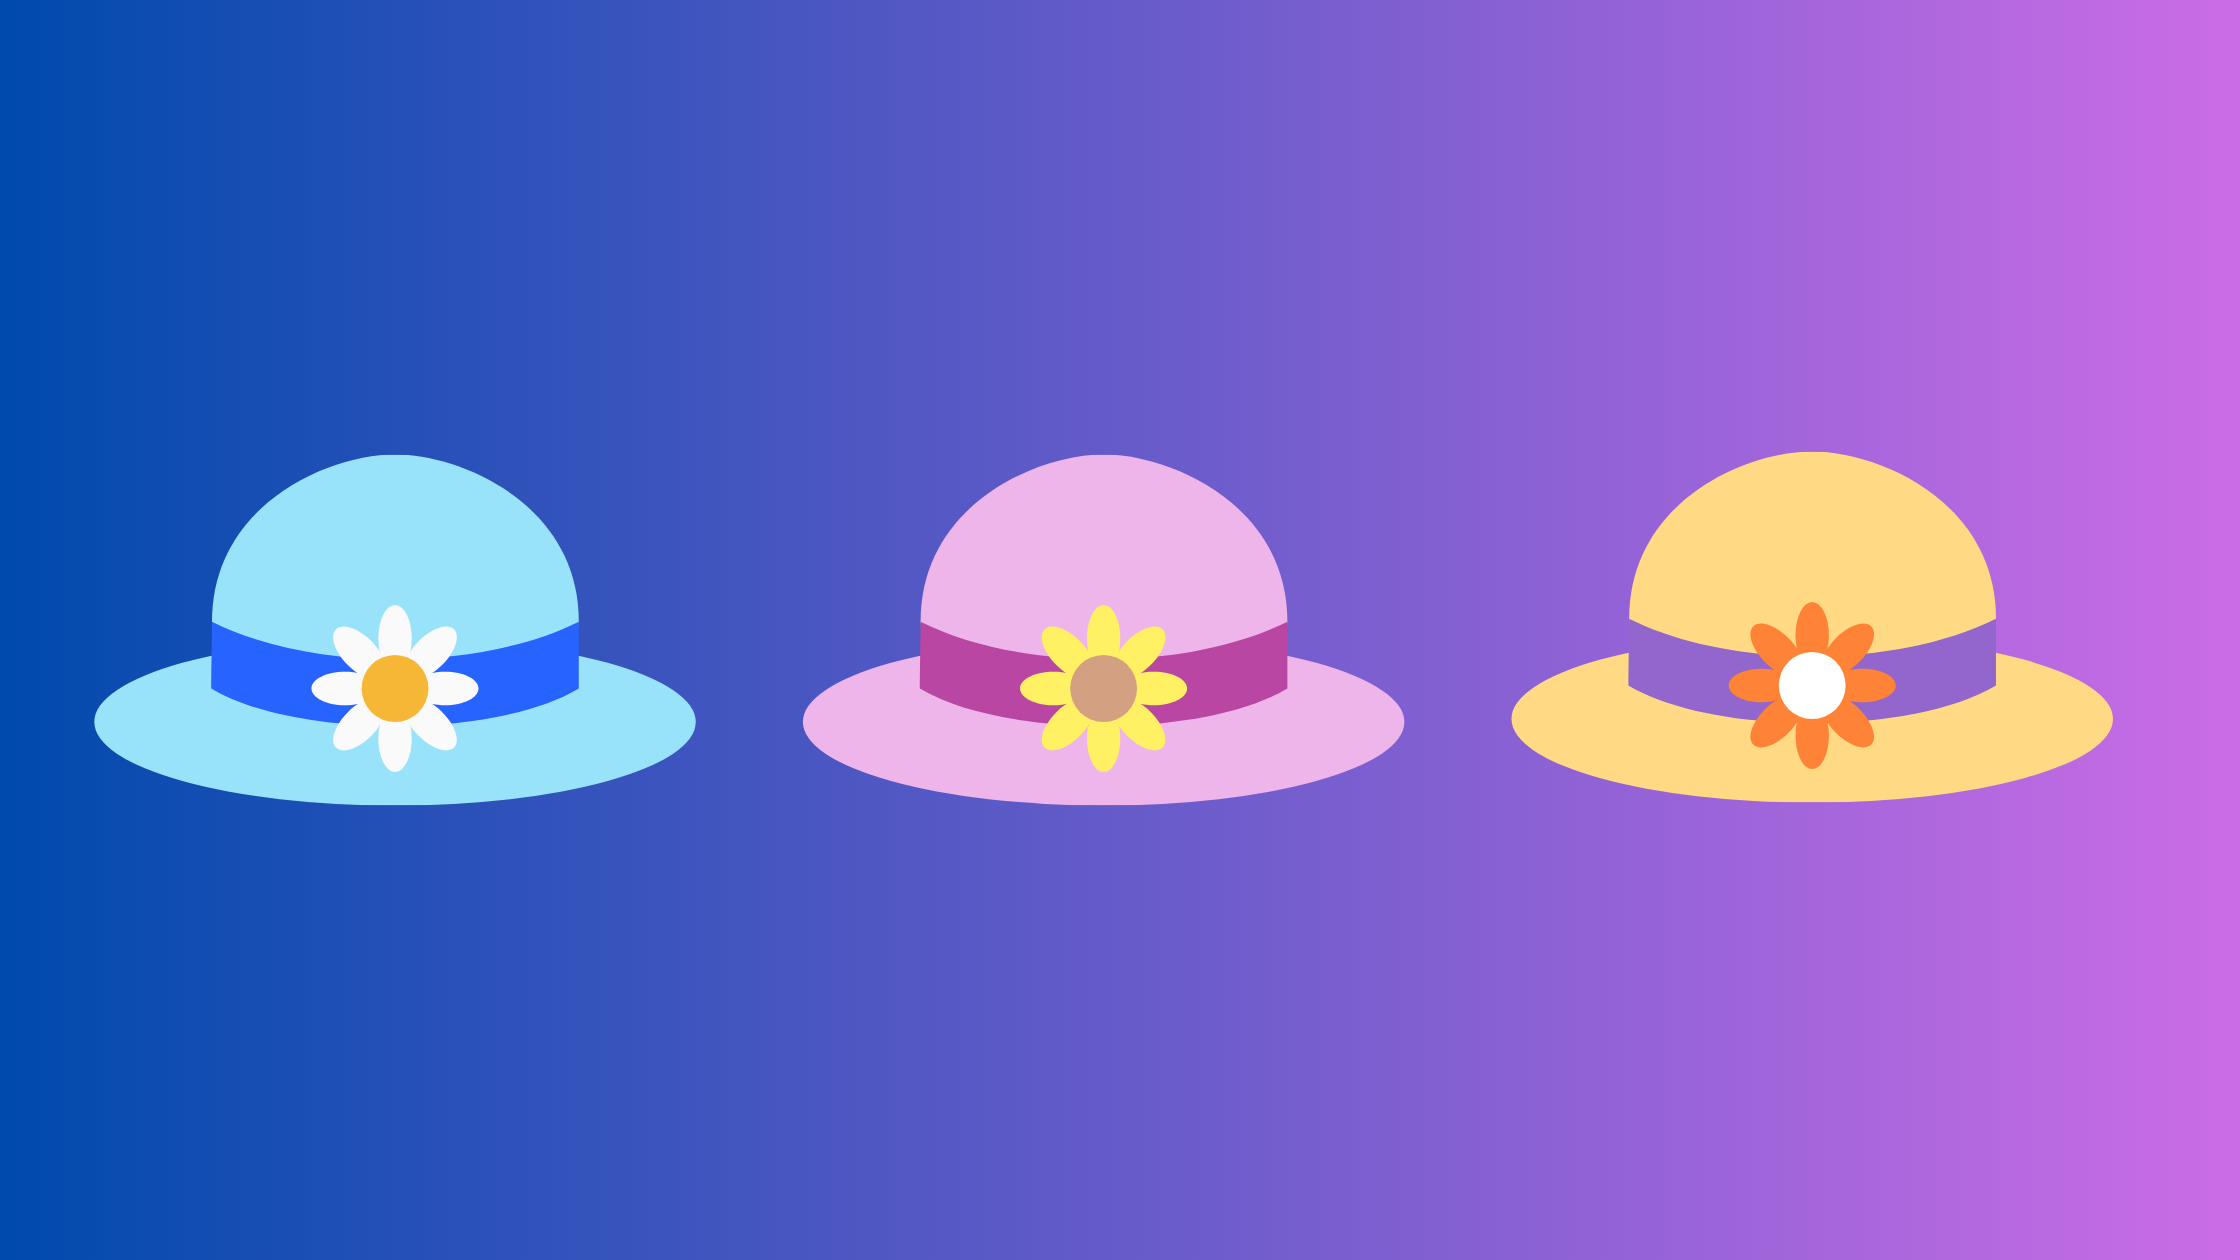 The 3 Business Hats